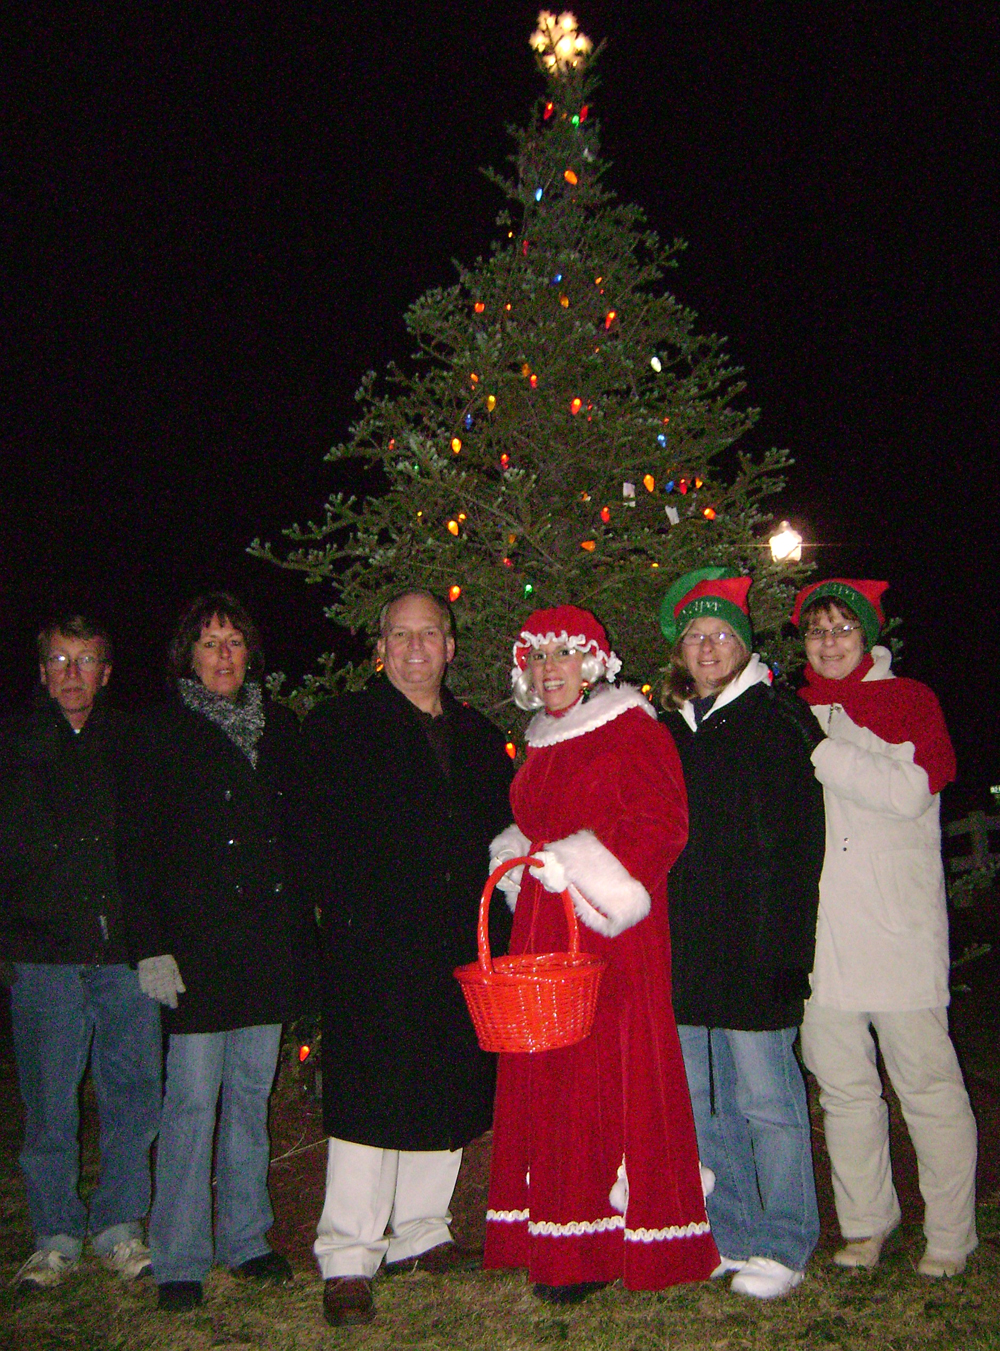 Allan M. Dorman, Mayor, Village of Islandia (third from left) poses with the Islandia Village Board of Trustees at the third annual Christmas tree lighting ceremony, which was held December 6 at Village Hall.